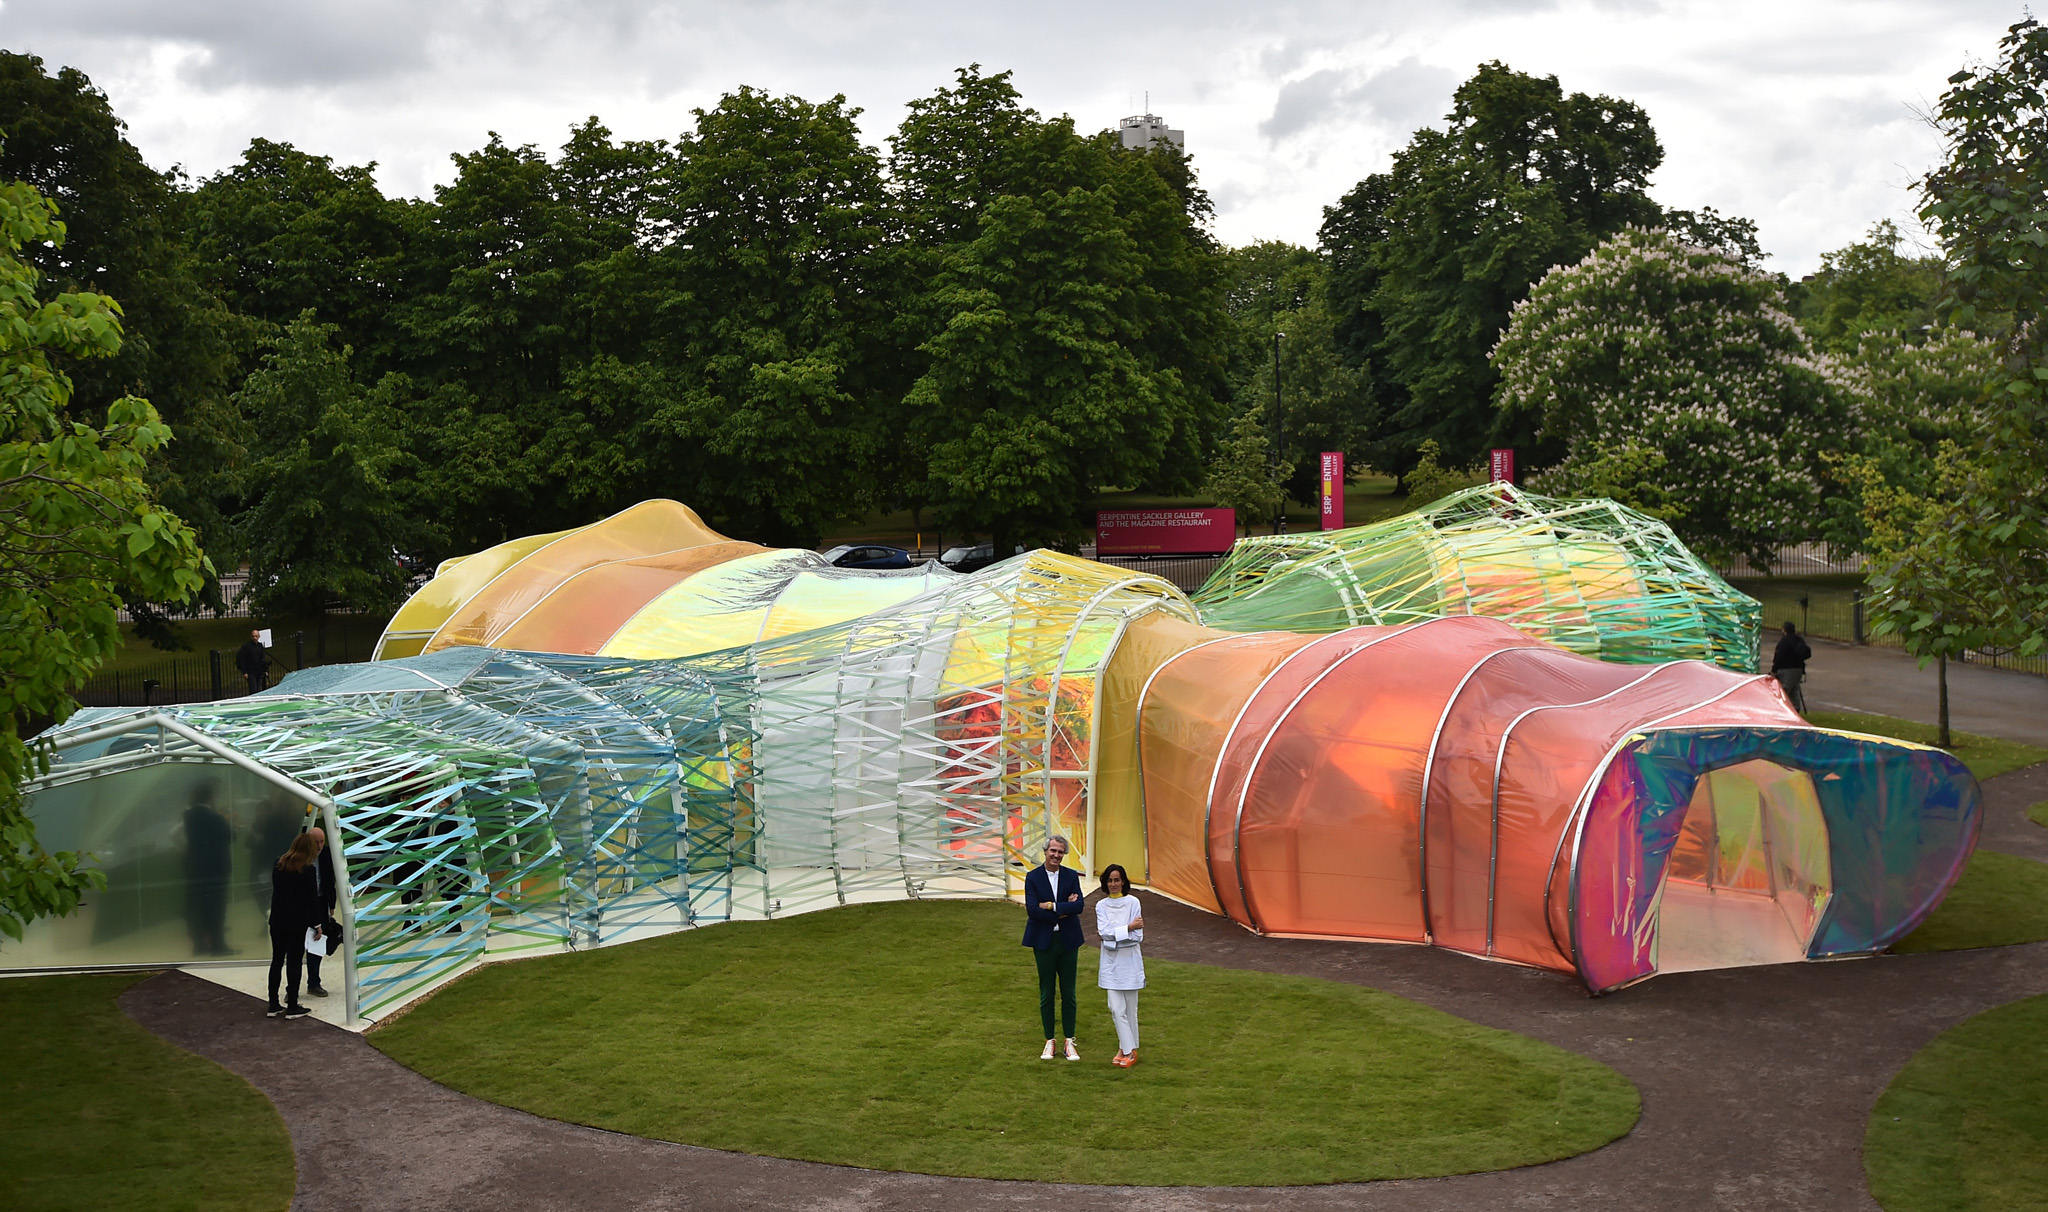 Spanish architects Lucia Cano (R) and Jose Selgas pose by their Serpentine pavilion structure at the Serpentine Gallery in London on June 22, 2015. For the last 15 years the Serpentine gallery has invited artists and architects to produce a temporary structure in the gardens of the gallery. AFP PHOTO / BEN STANSALL (Photo credit should read BEN STANSALL/AFP/Getty Images)